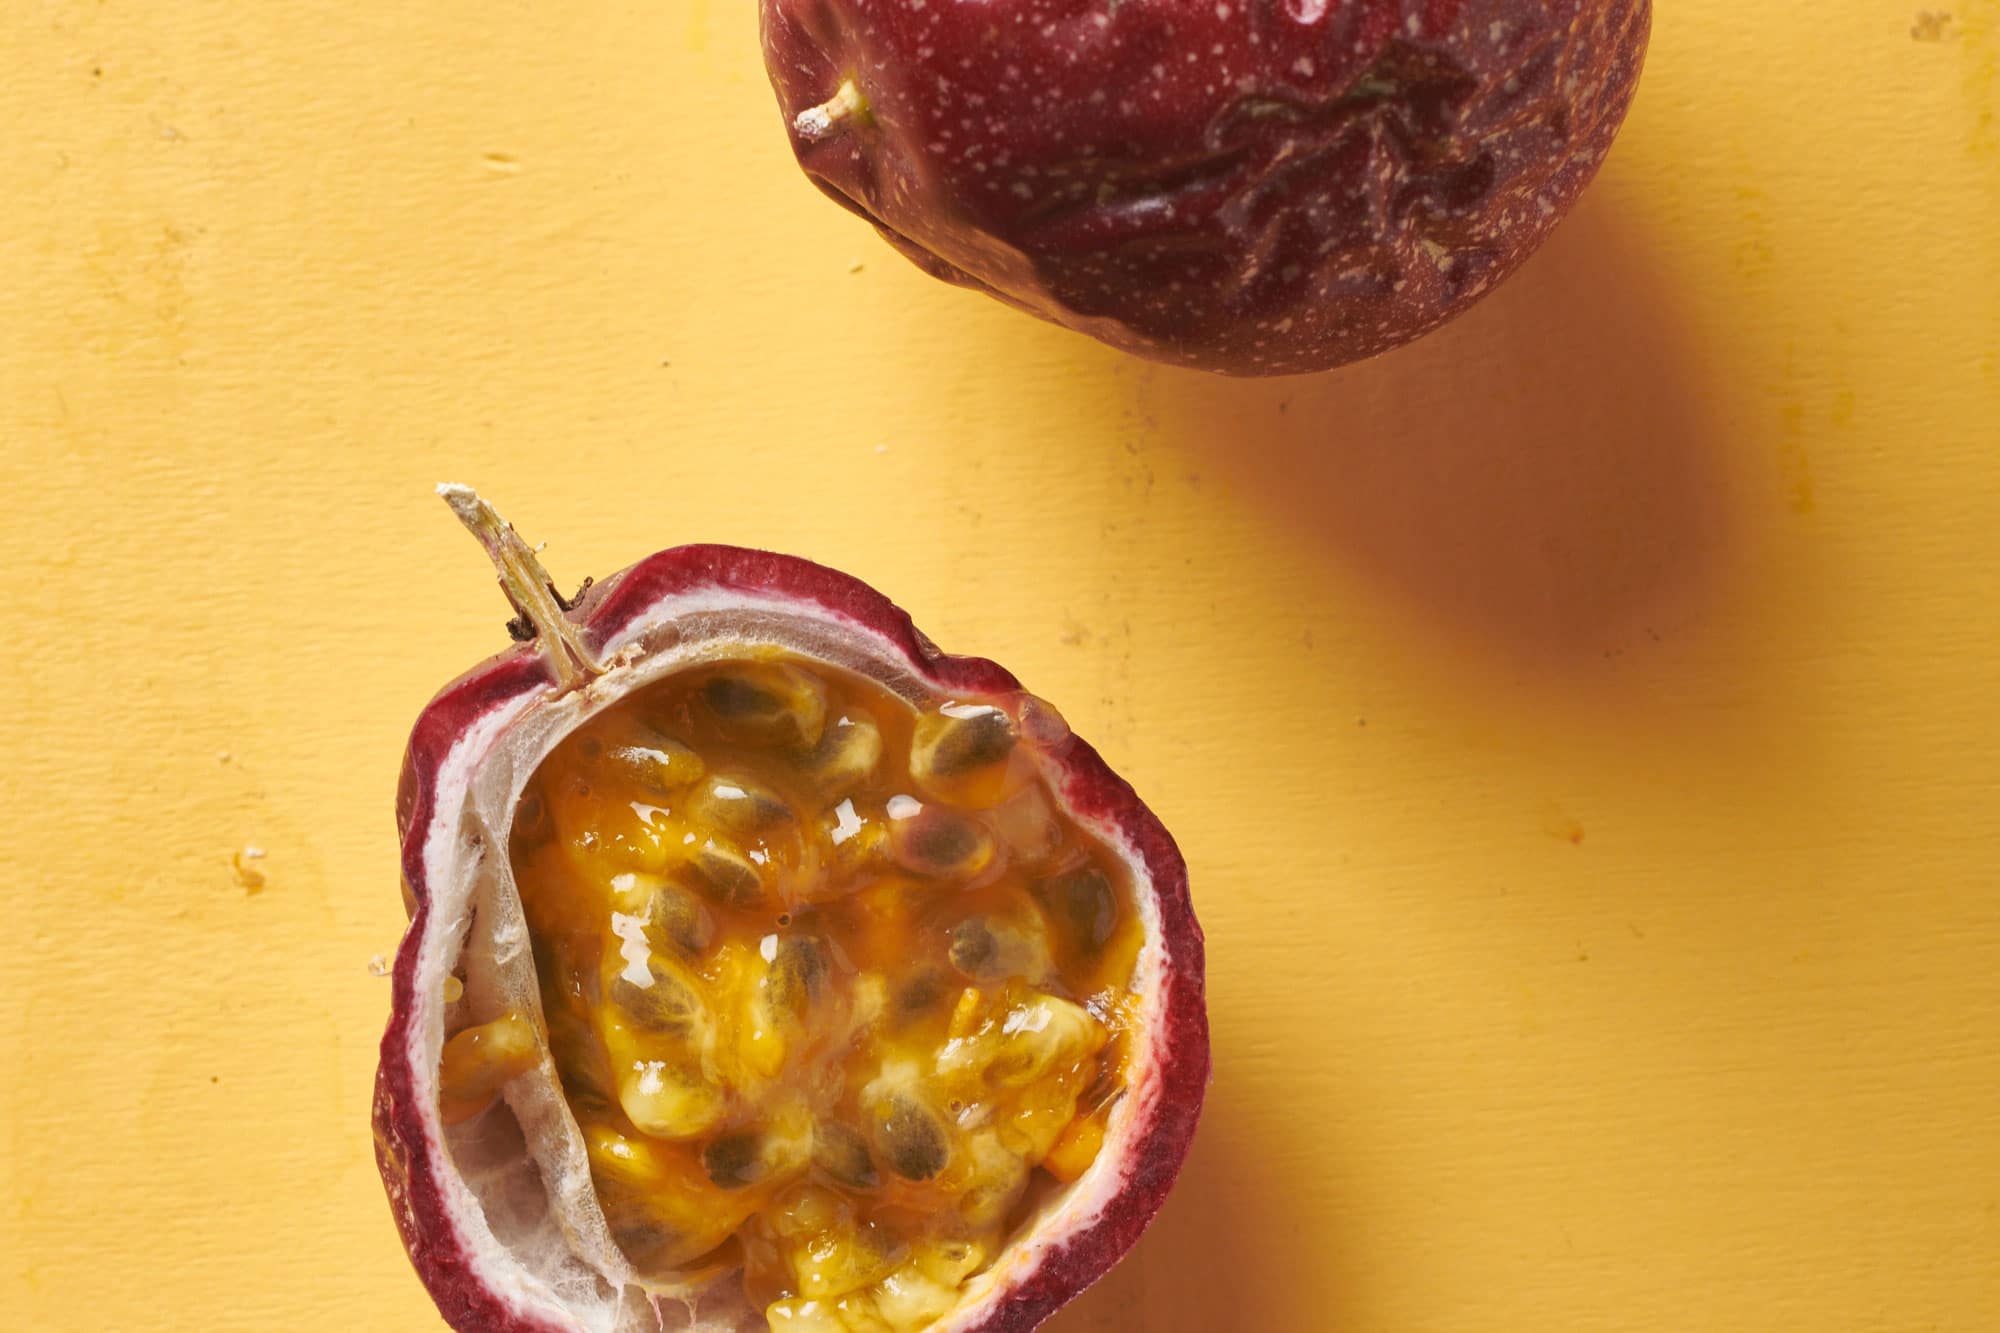 Half of a passion fruit with theseeds and juice inside.